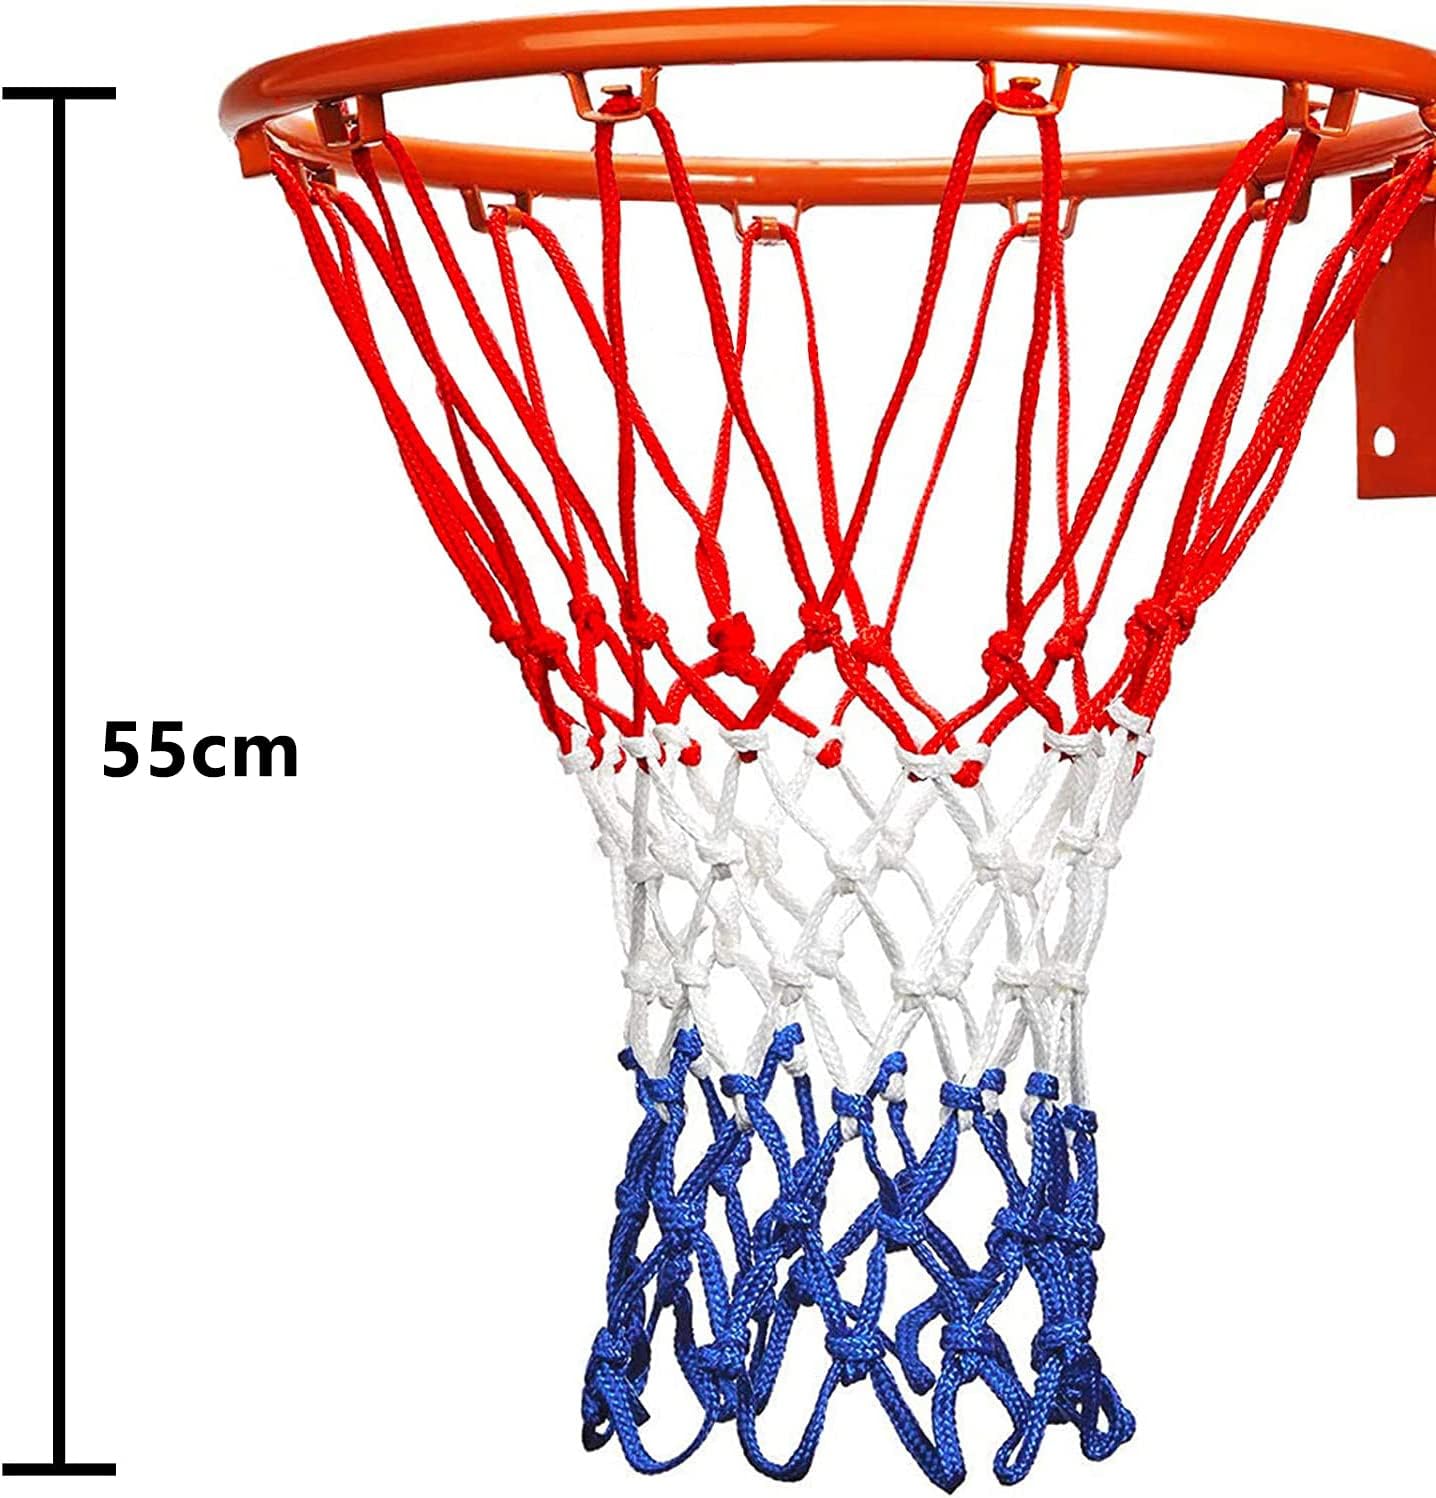 Arabest Basketball Net - 2PCS Heavy Duty Basketball Net Replacement, Upgraded Thickening 55cm Standard Basketball Net, All Weather Anti Whip 12 Loops for Indoor Outdoor Professional Competitions